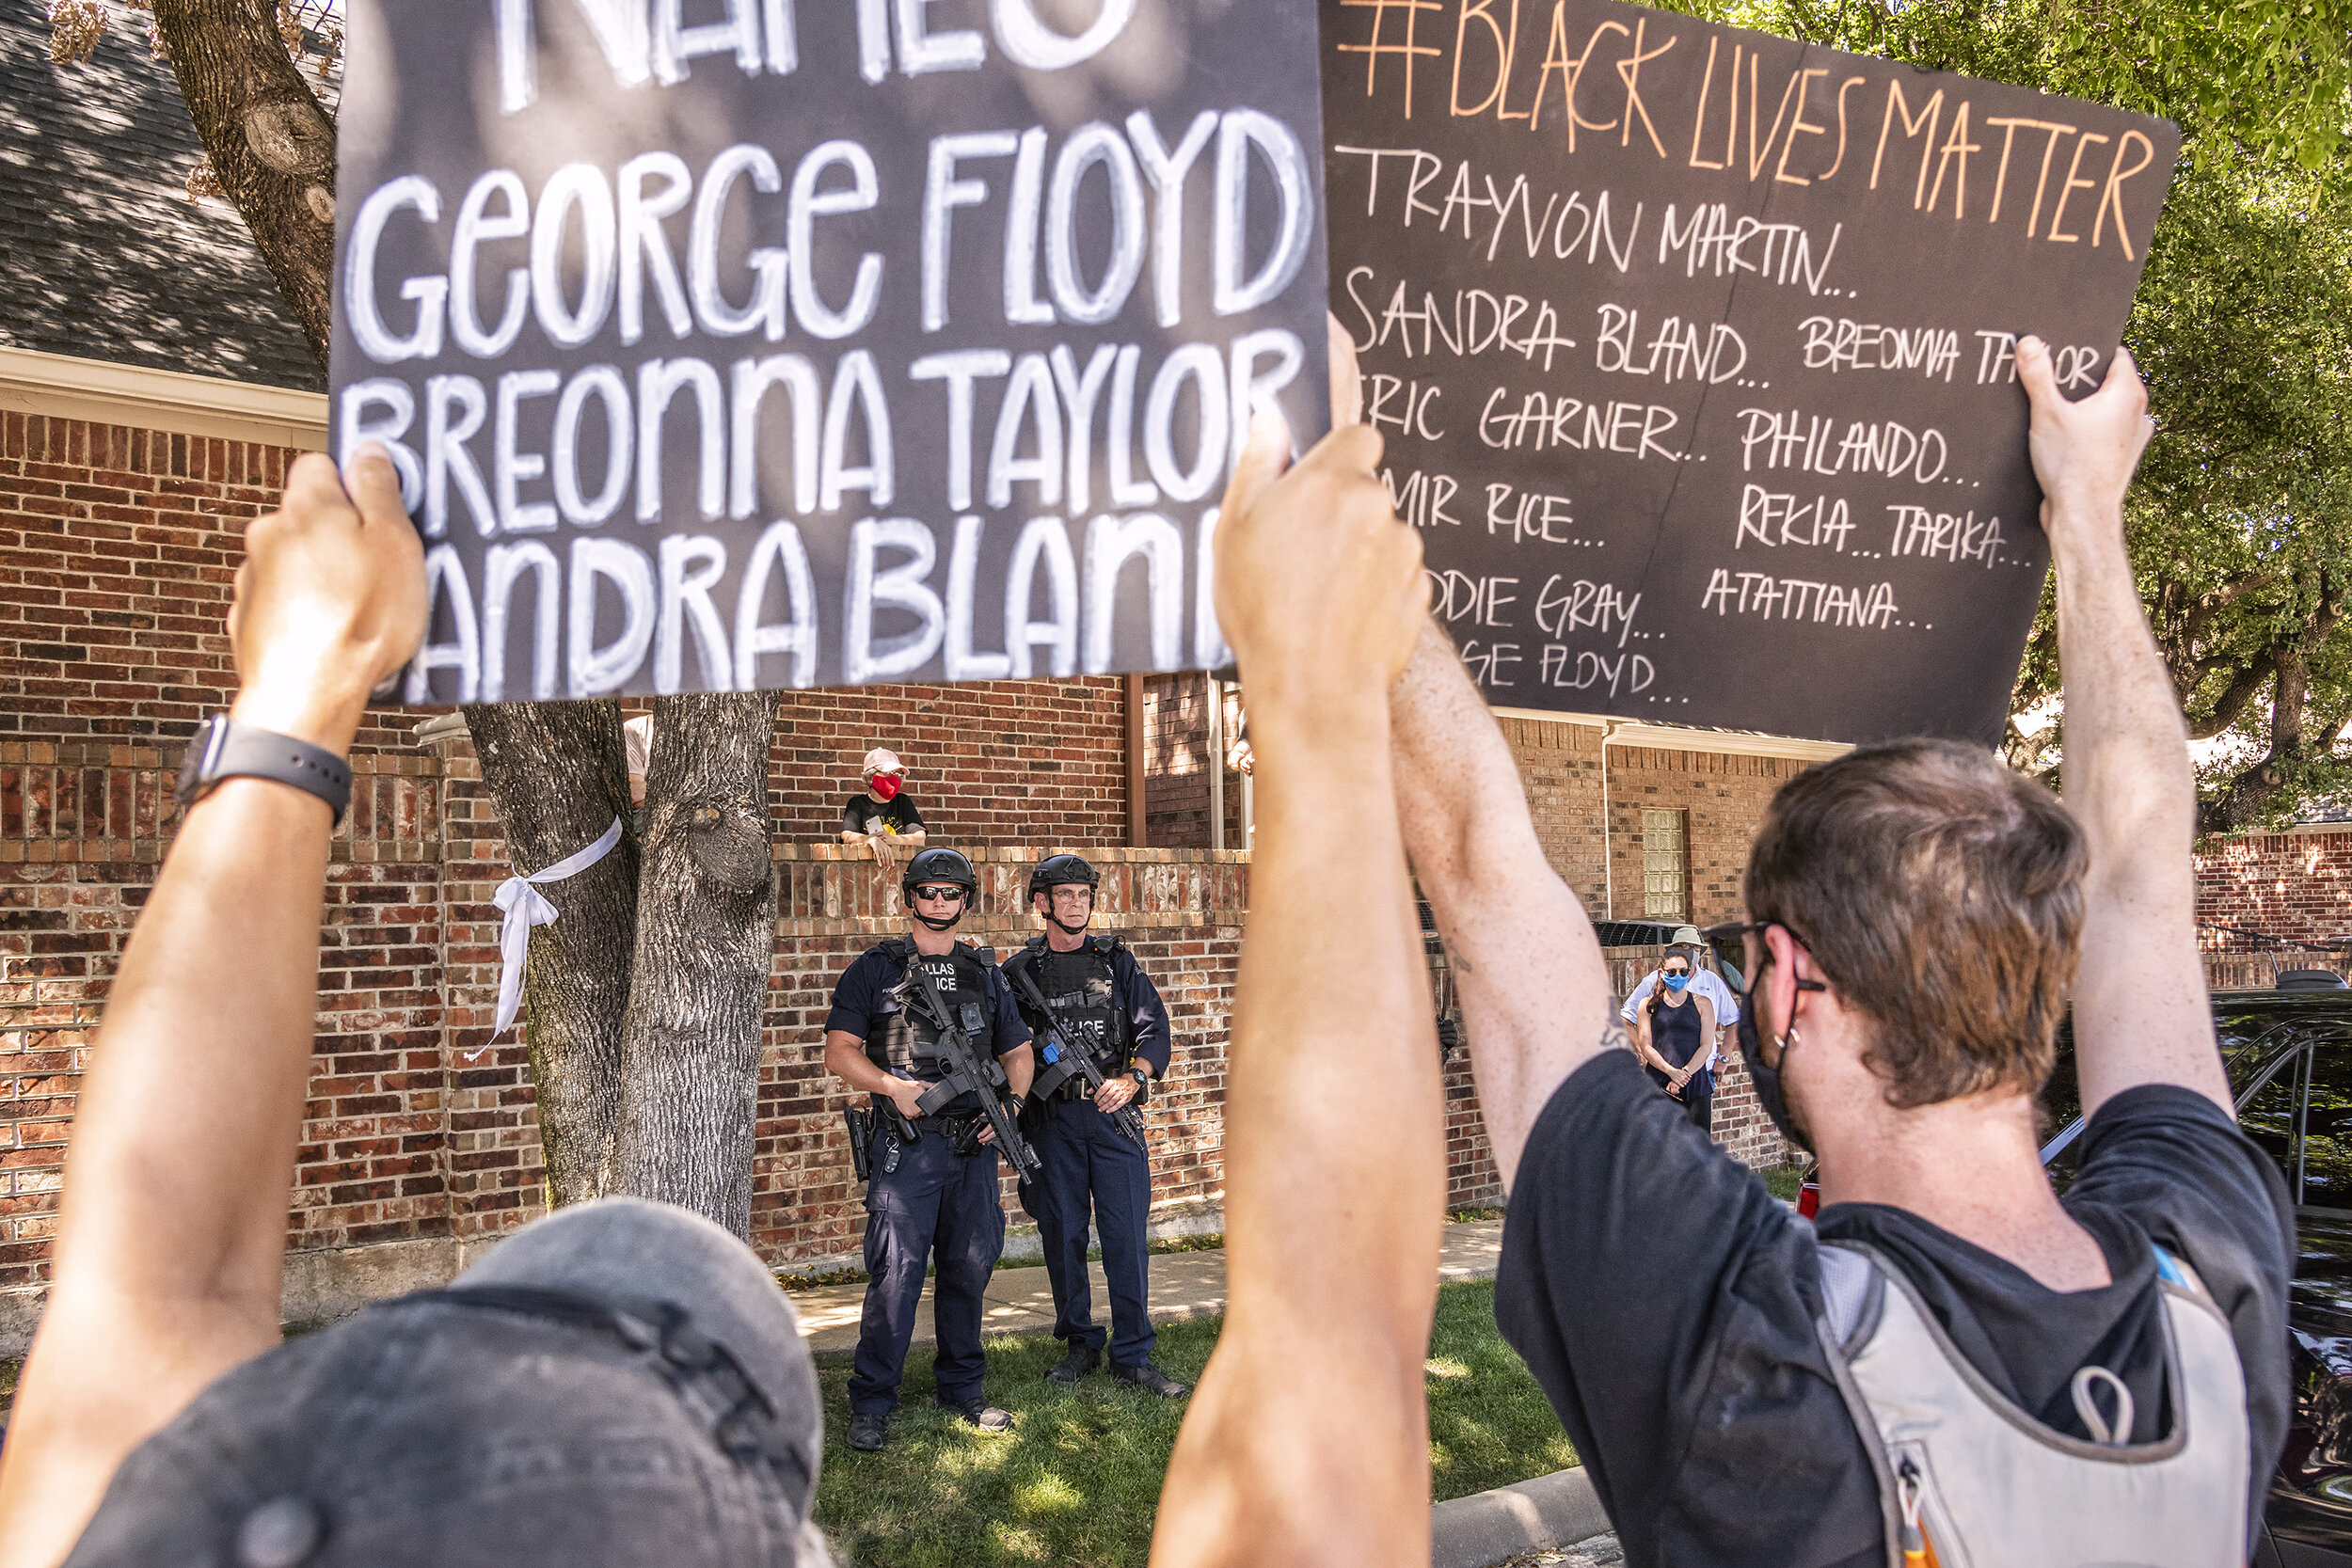  In the Preston Hollow neighborhood of Dallas, TX on June 11, 2020, protesters confront law enforcement with signs bearing names of Black Americans who died in police custody.  The protest coincided with President Donald Trump’s visit to Gateway Chur